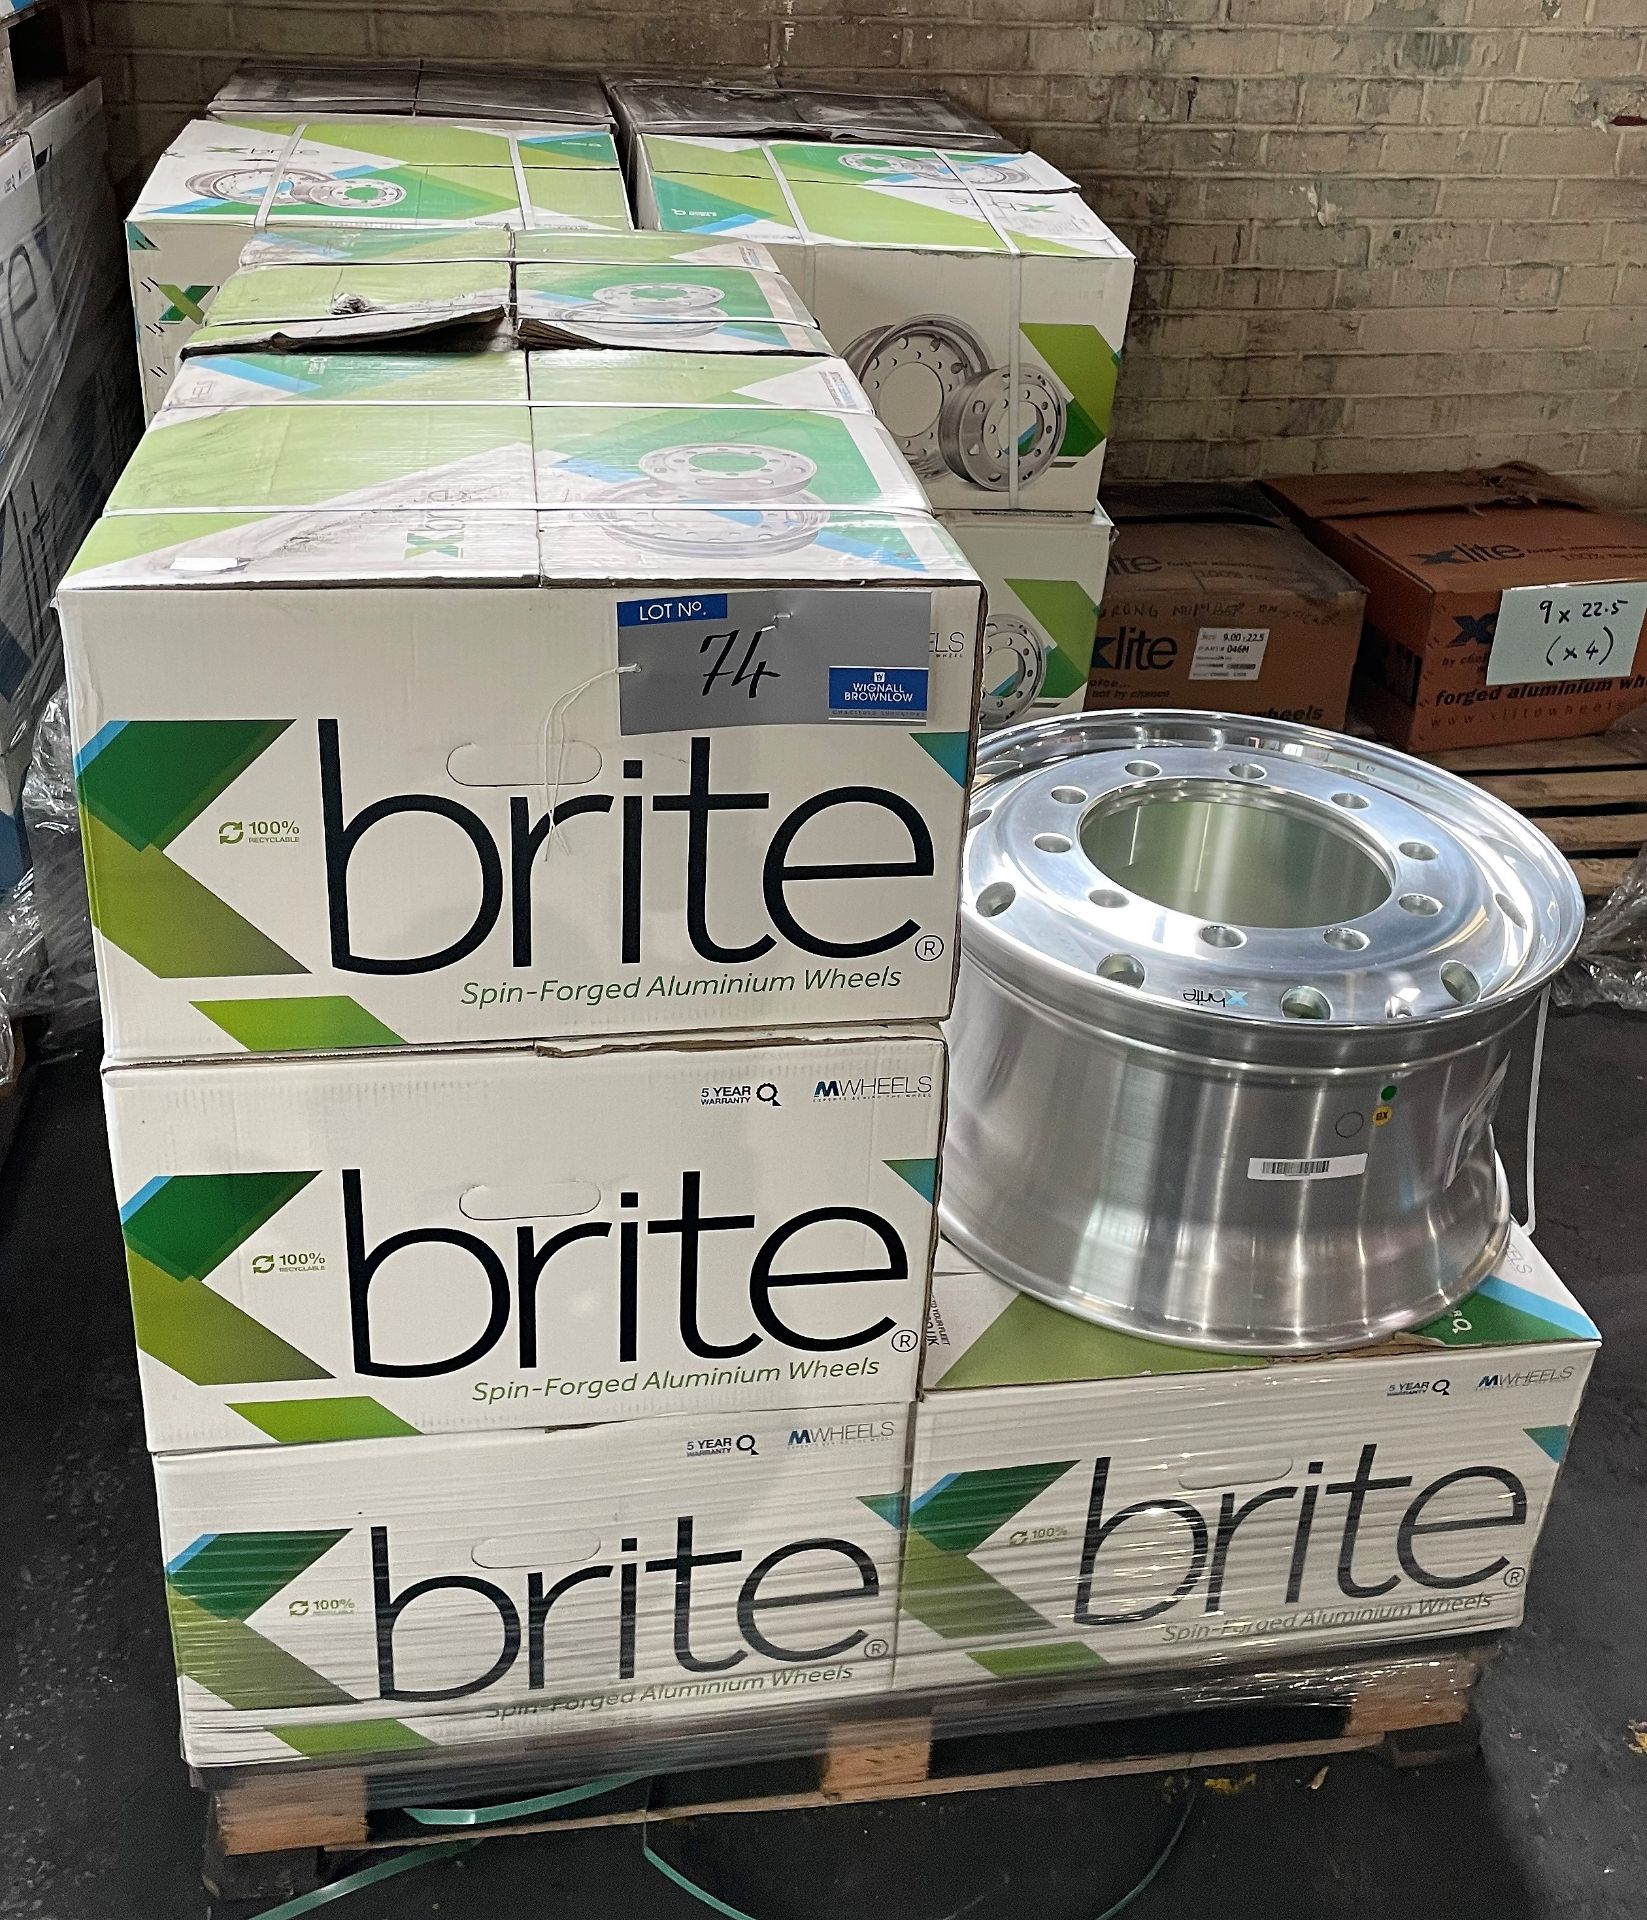 20 MWheels Xbrite Spin Forged Aluminium Wheels, 11.75 x 22.5, Part No.060XB+, Xbrite 32mm (boxed - Image 2 of 3